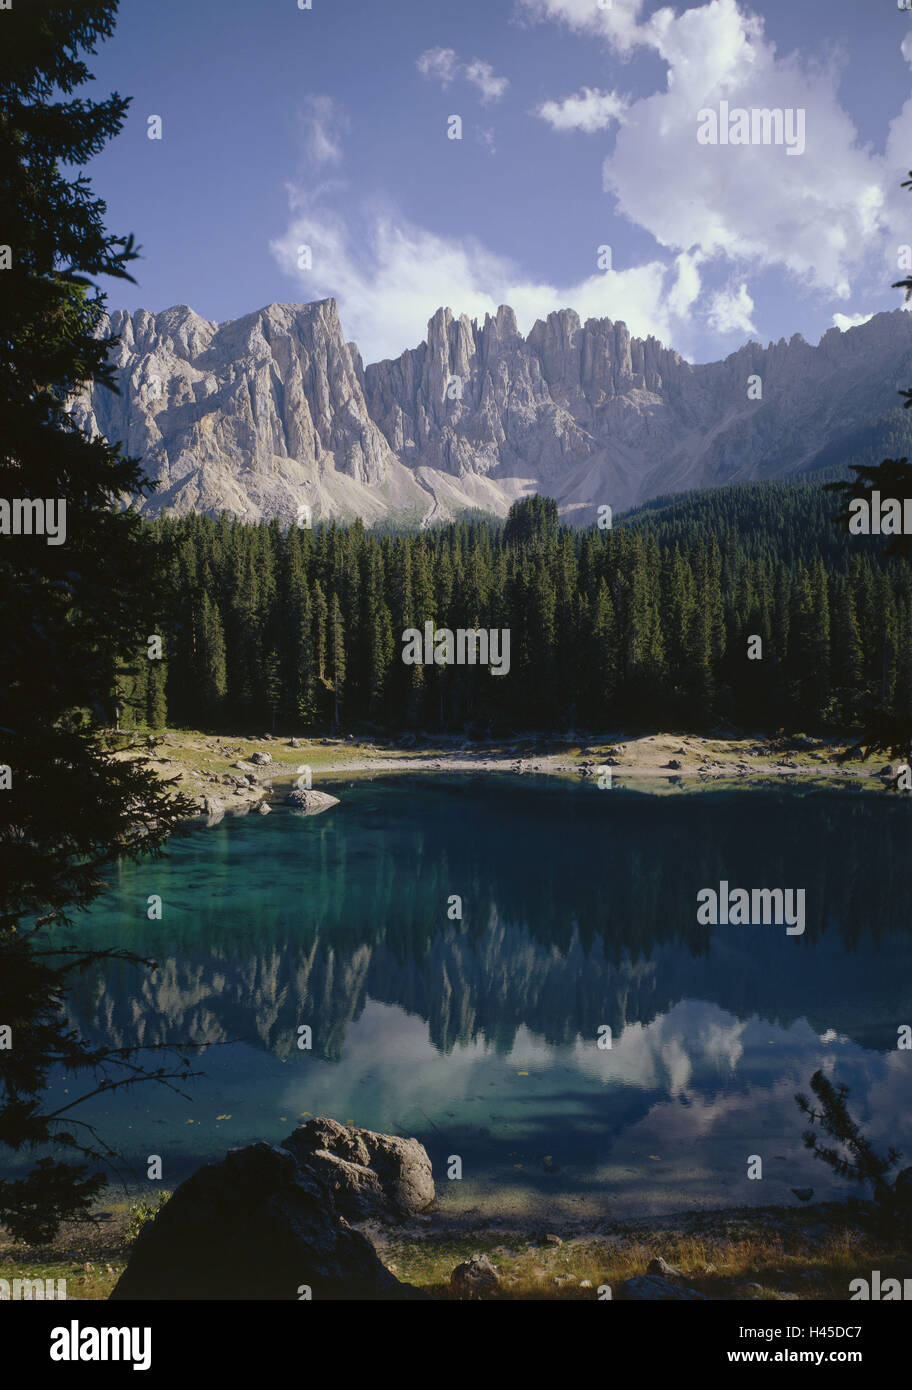 Italy, the Dolomites, Trentino, Lago de Carezza, mountain Latemar, mirroring, water surface, alps, Alps region, South Tyrol, nature, Karersee, mountain lake, lake, waters, edge the forest, woodland, wood, lime alps, mountains, mountains, mountain region, scenery, rest, silence, loneliness, Stock Photo